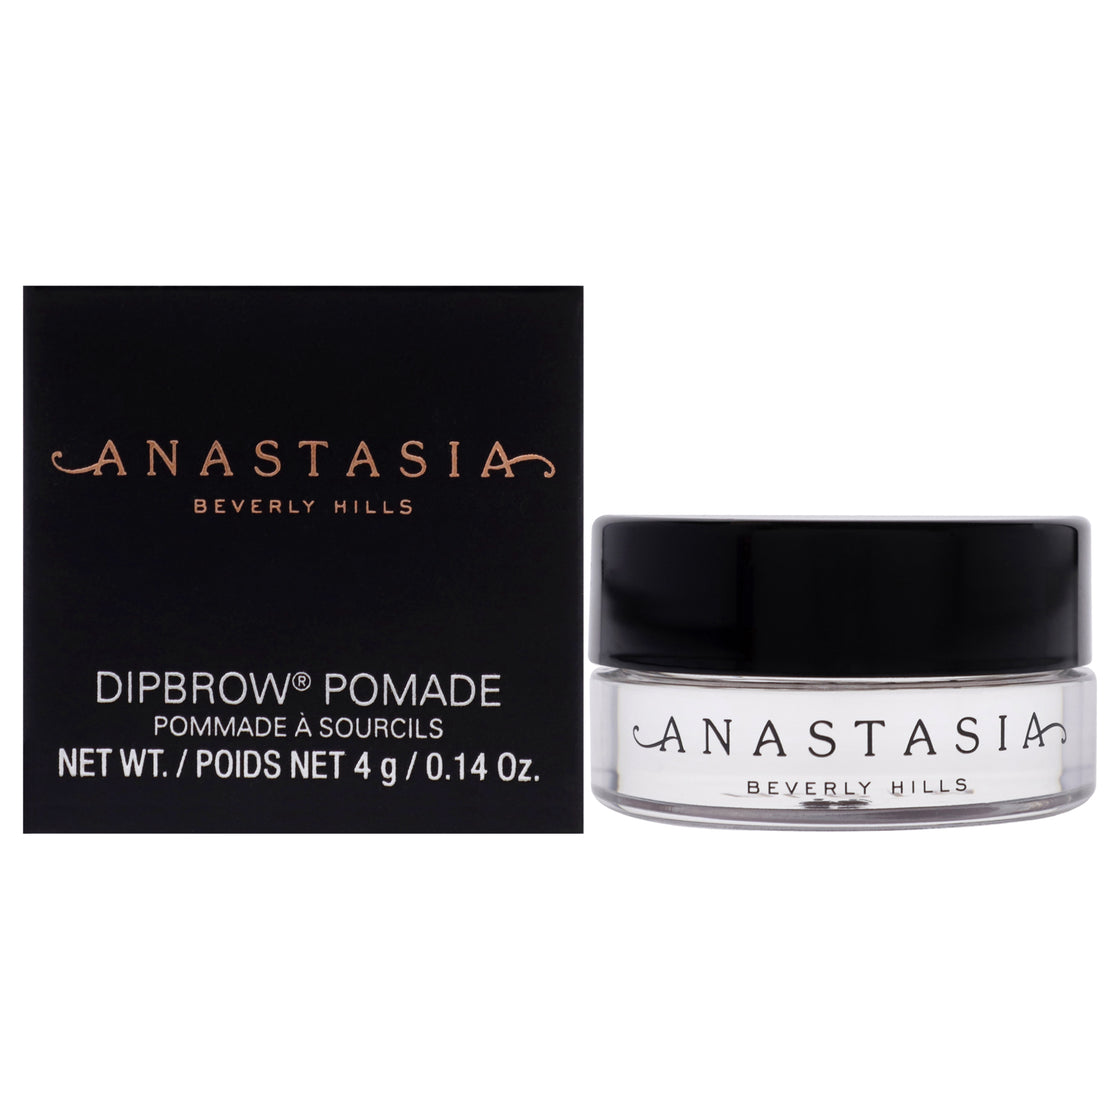 DipBrow Pomade - Chocolate by Anastasia Beverly Hills for Women - 0.14 oz Eyebrow